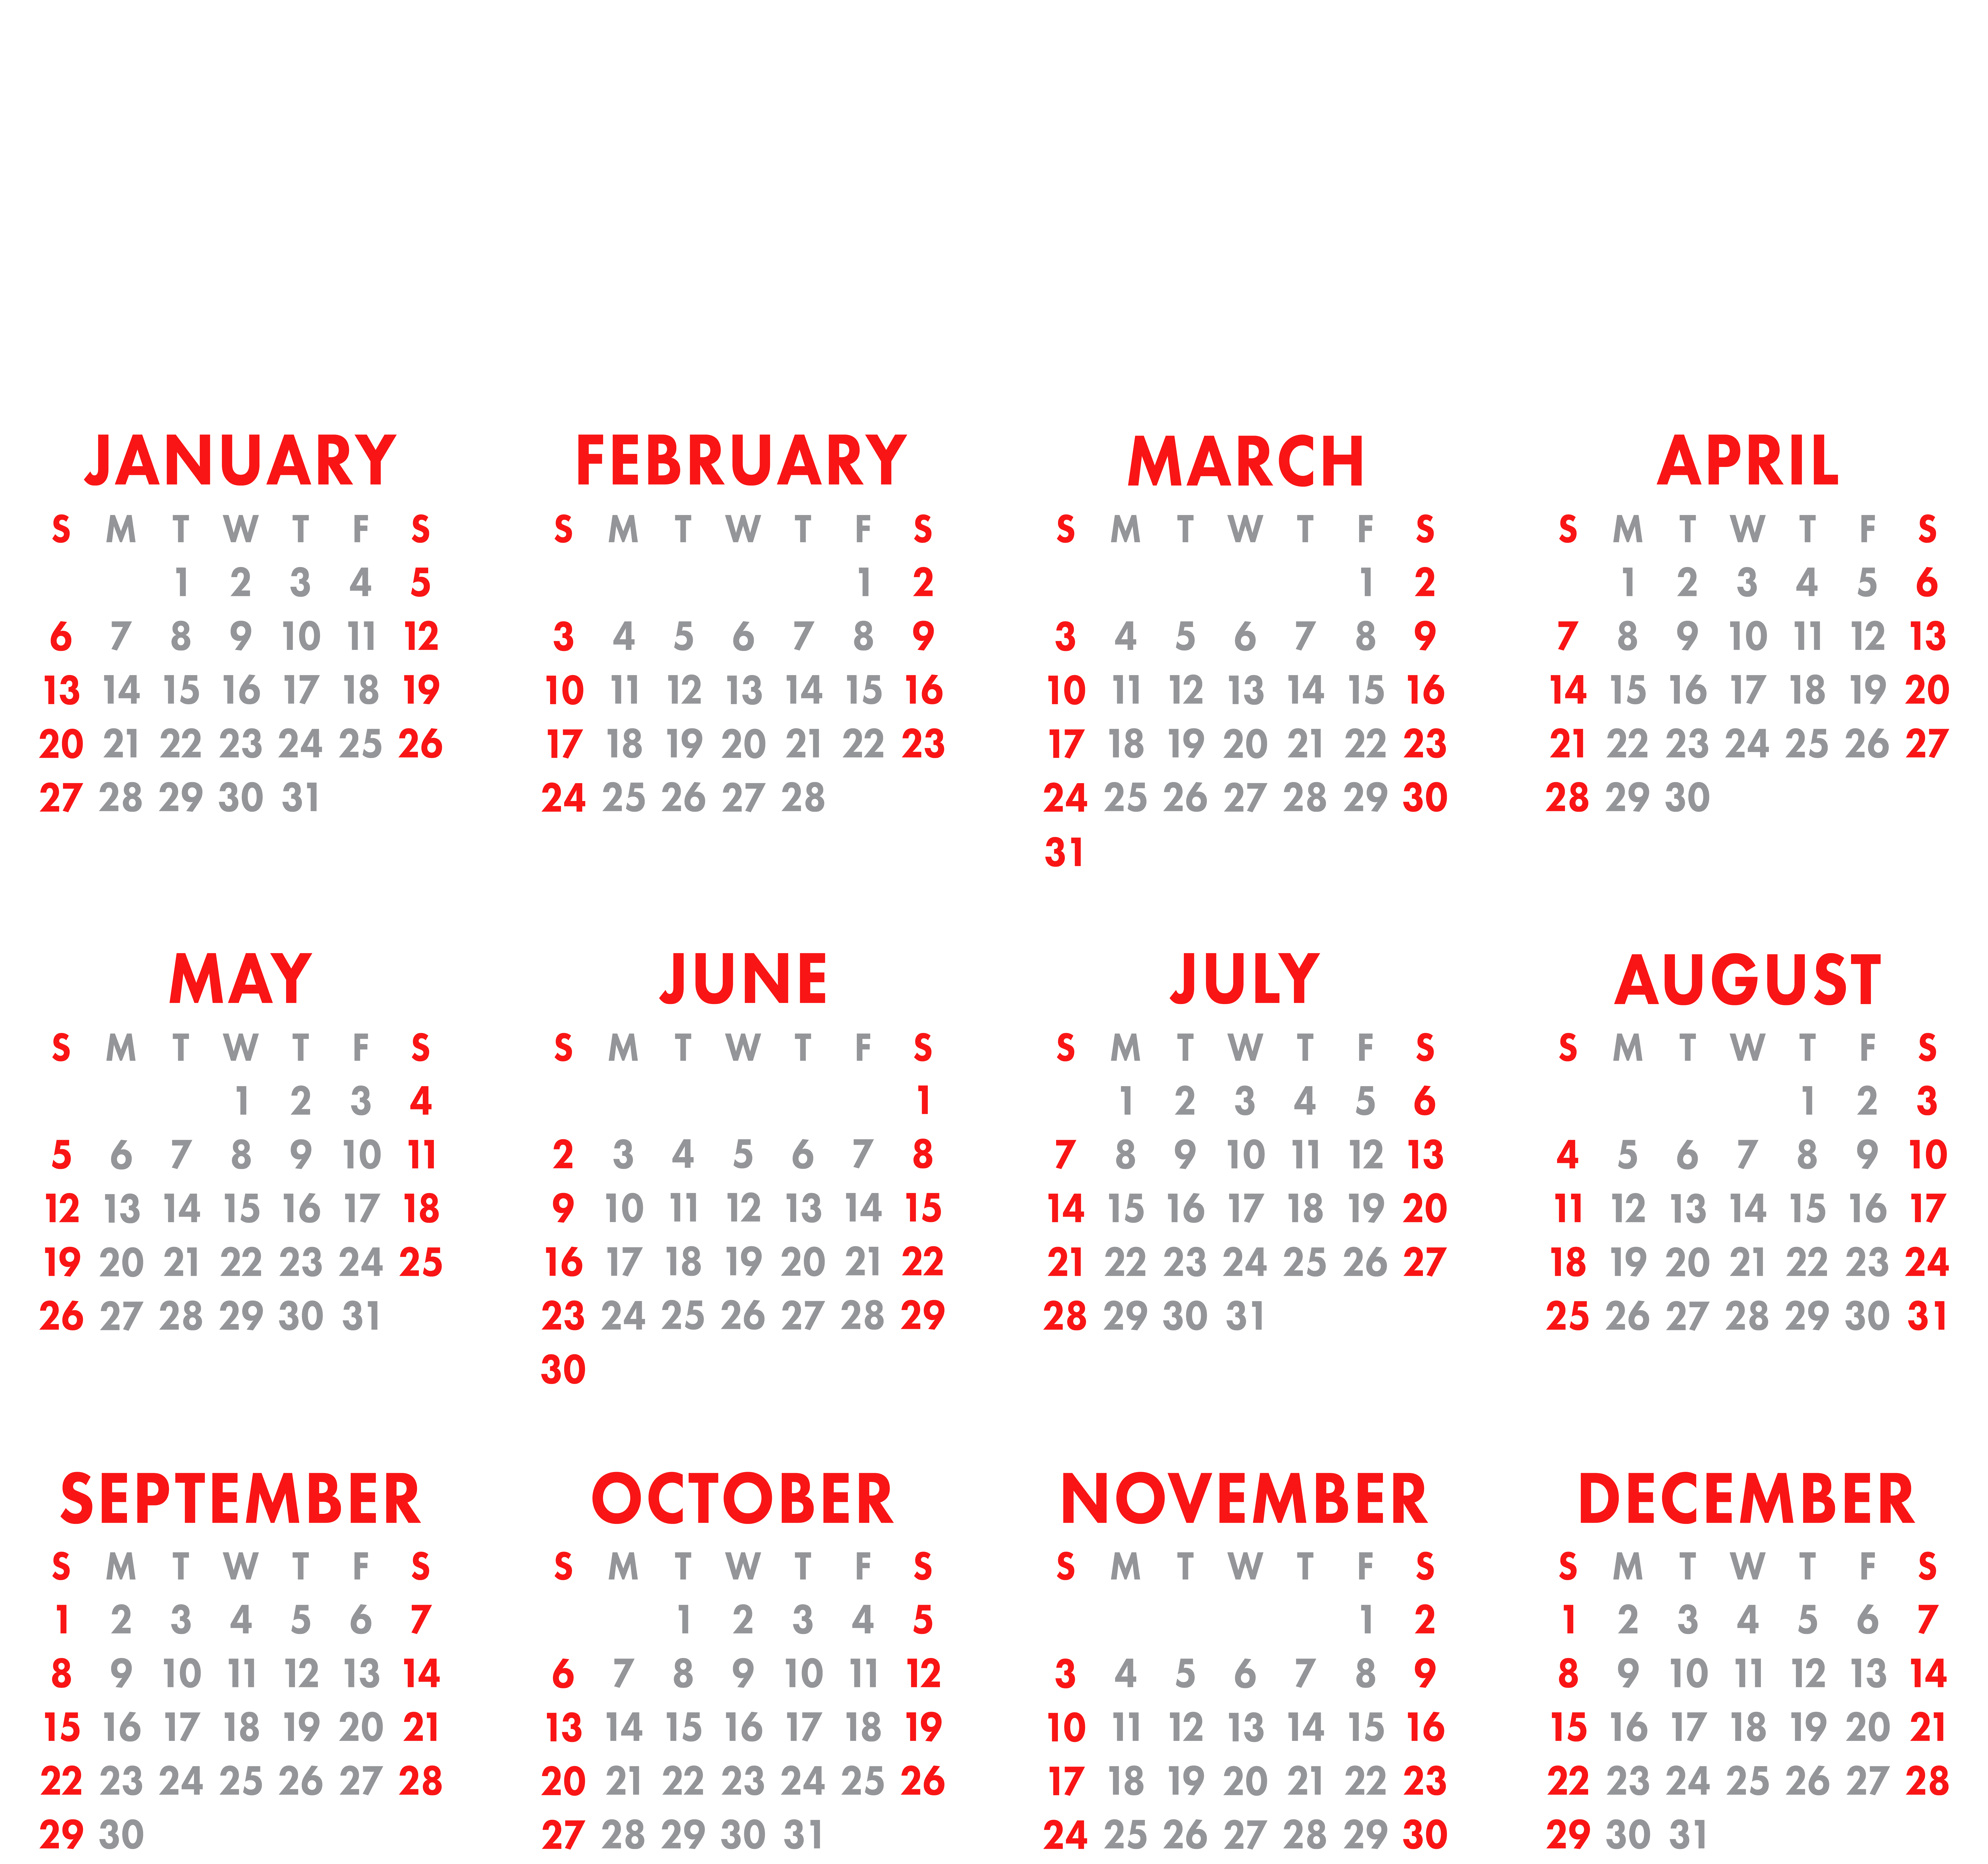 2019 calendar clipart hd 14 free Cliparts | Download images on ...